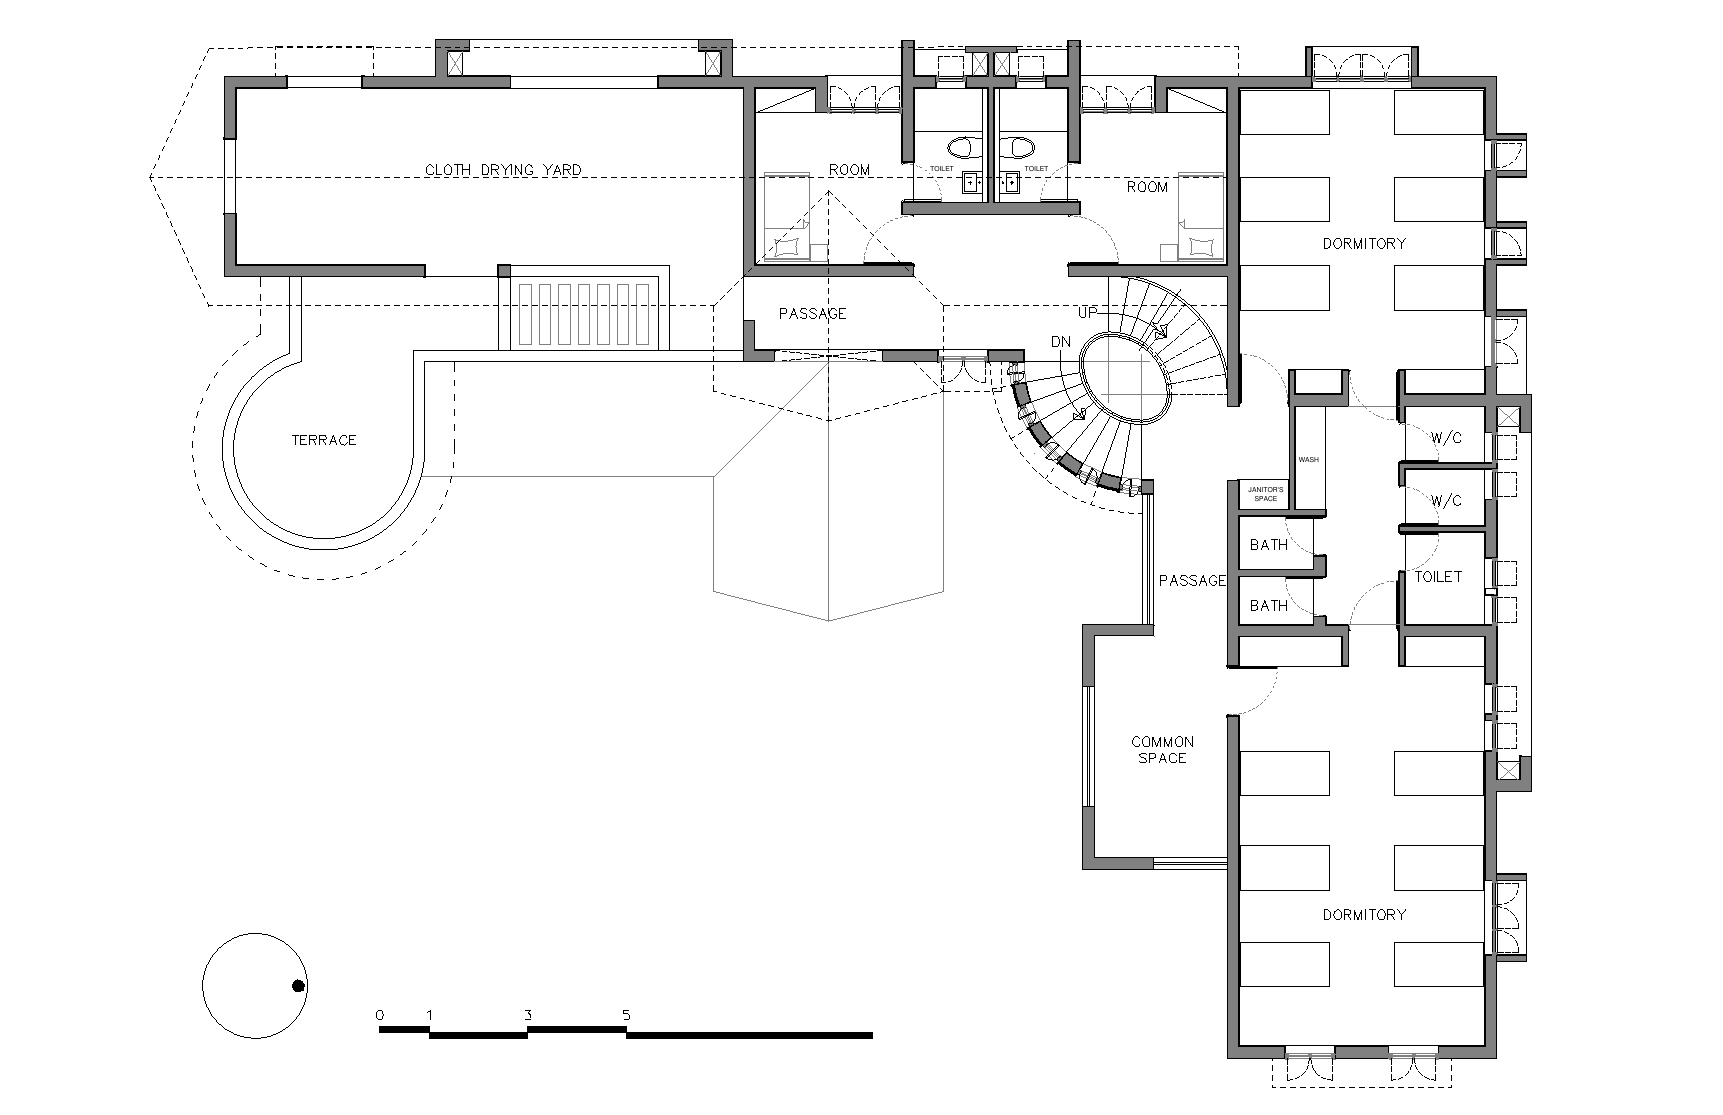 Second Floor Plan of Gril's Home